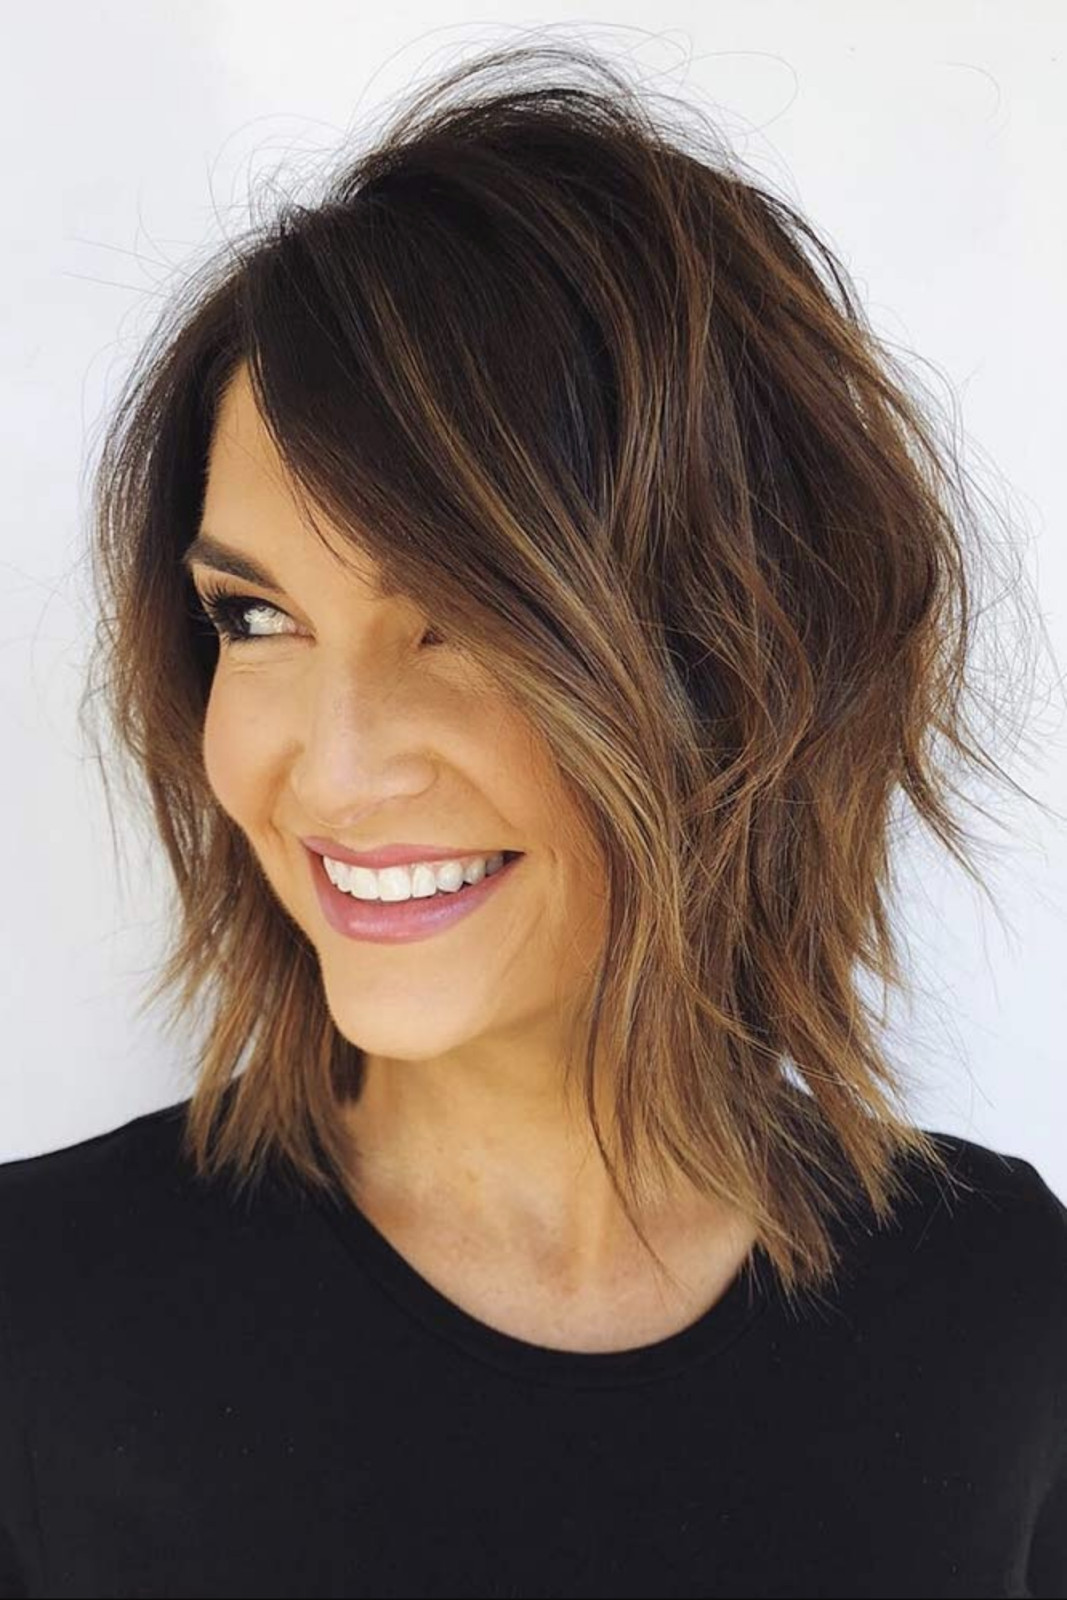 Italian Hairstyles Female 2020
 2019 2020 Short Hairstyles for Women Over 50 That Are